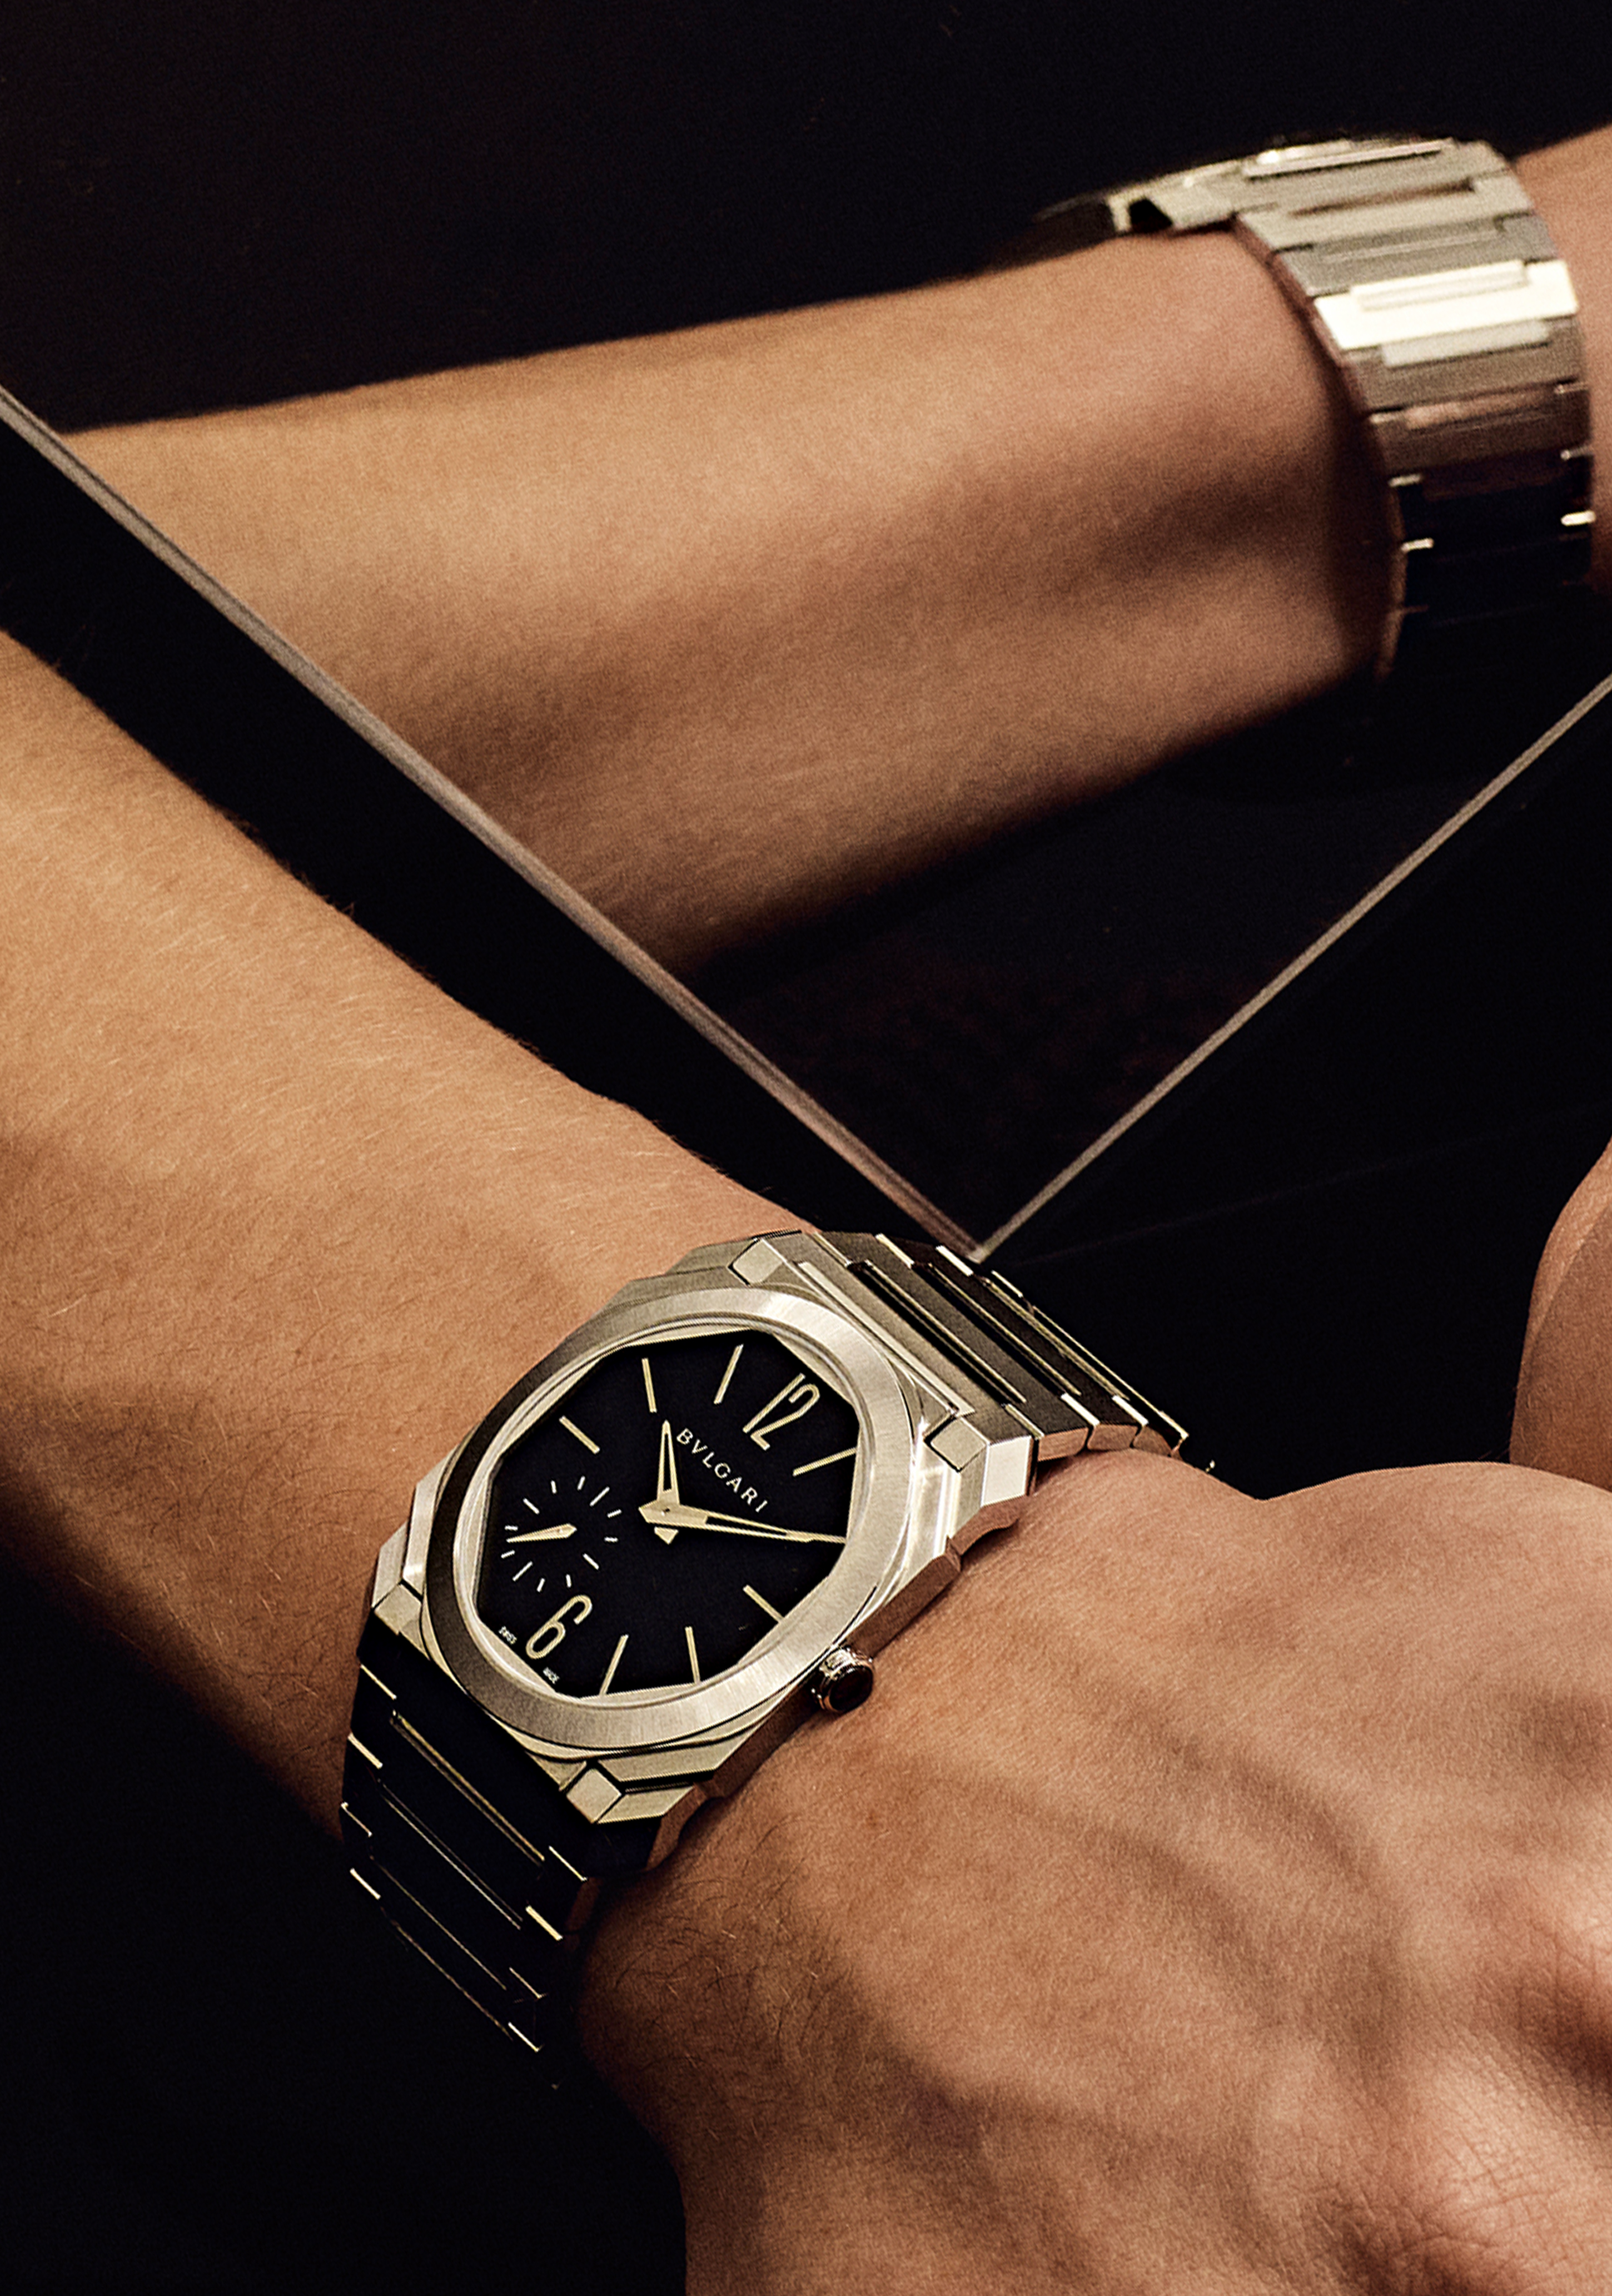 The Octo Finissimo paves the road into a thrilling new future for Swiss watchmaking.